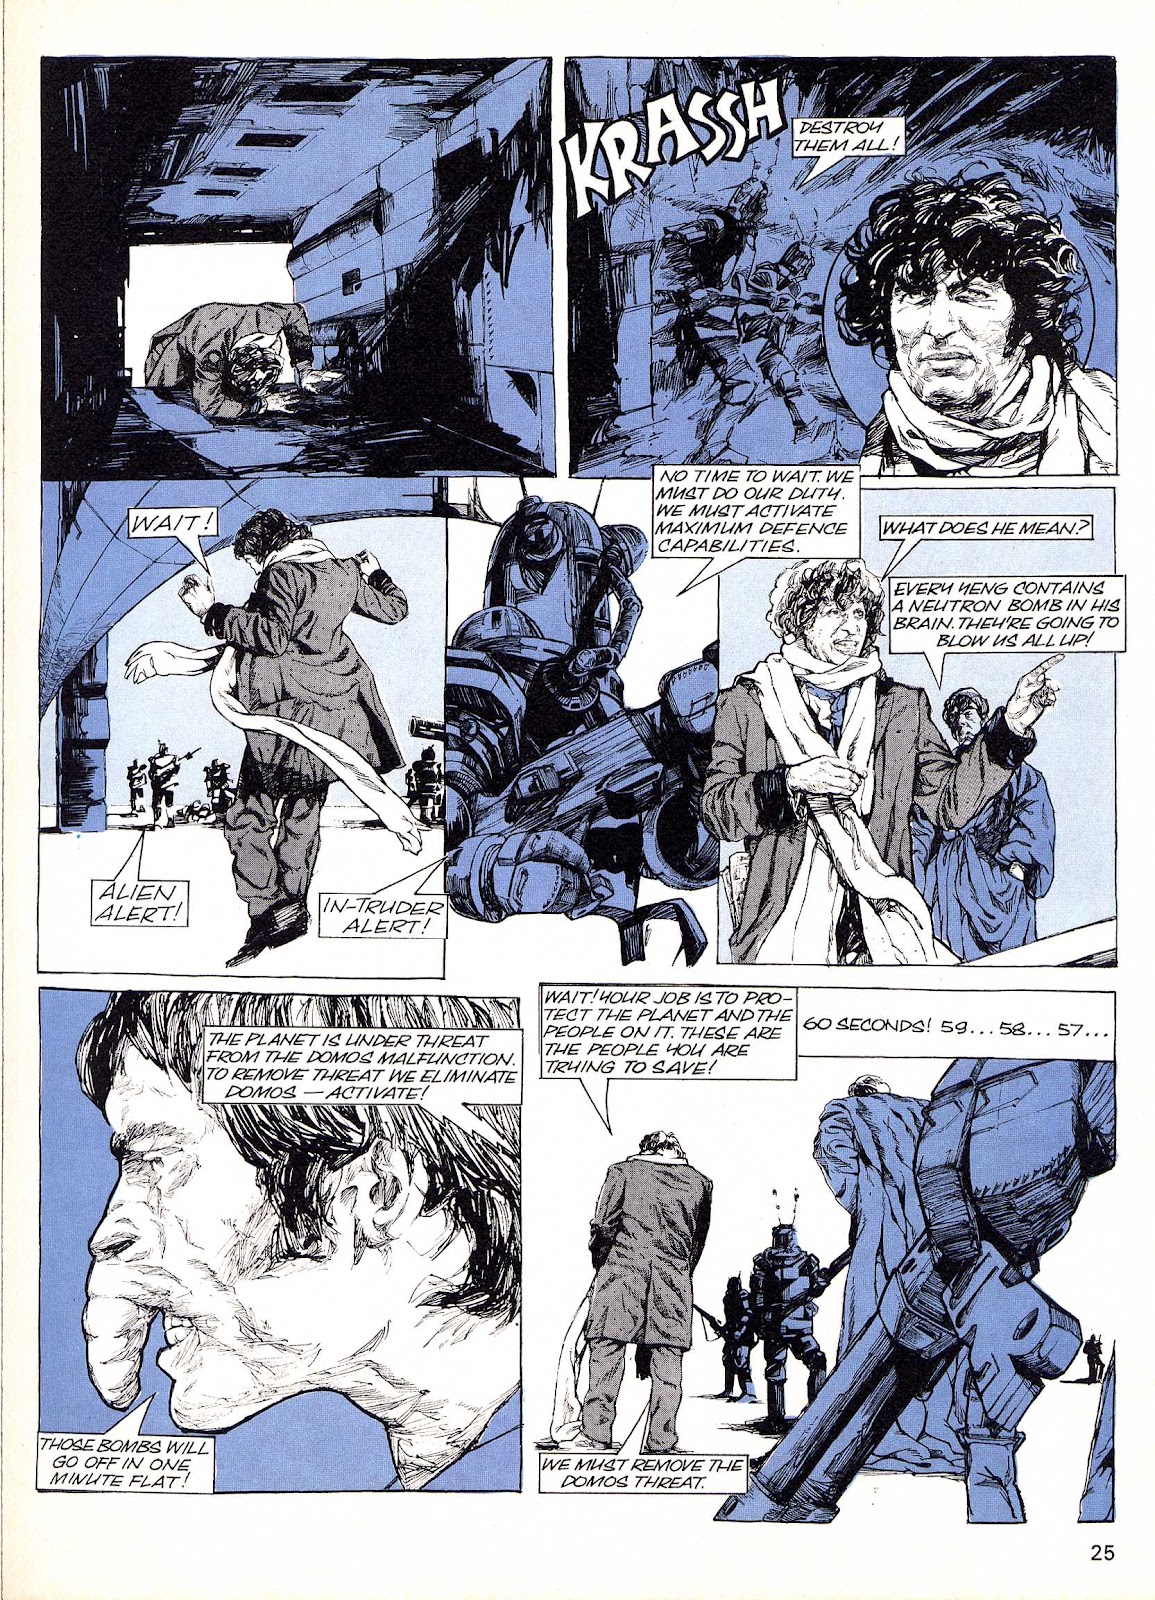 Doctor Who Annual issue 1978 - Page 6